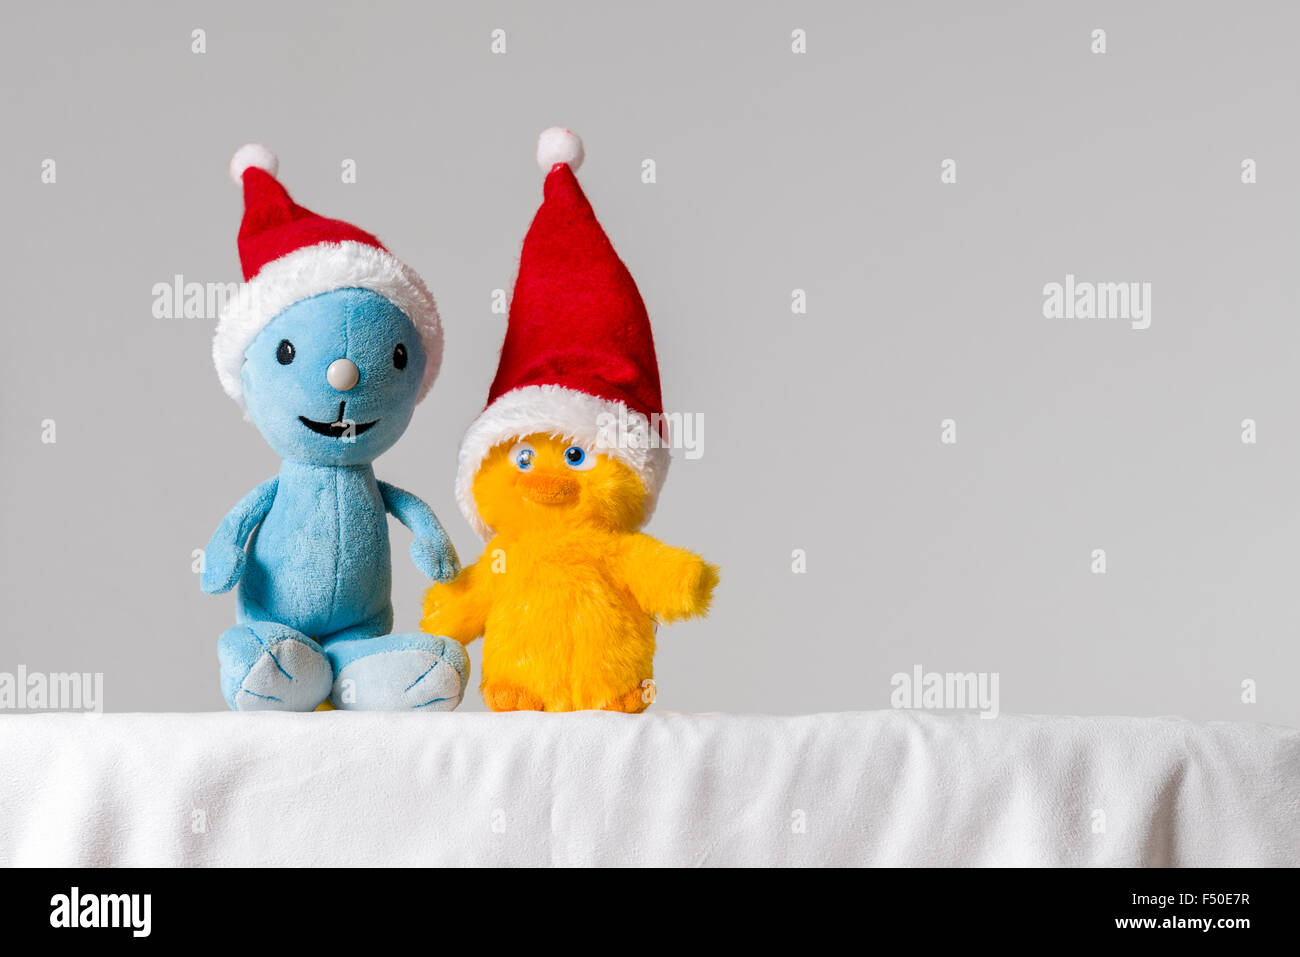 A light blue and a yellow cuddly toy, wearing Santa Claus hats, are sitting together on a white table Stock Photo